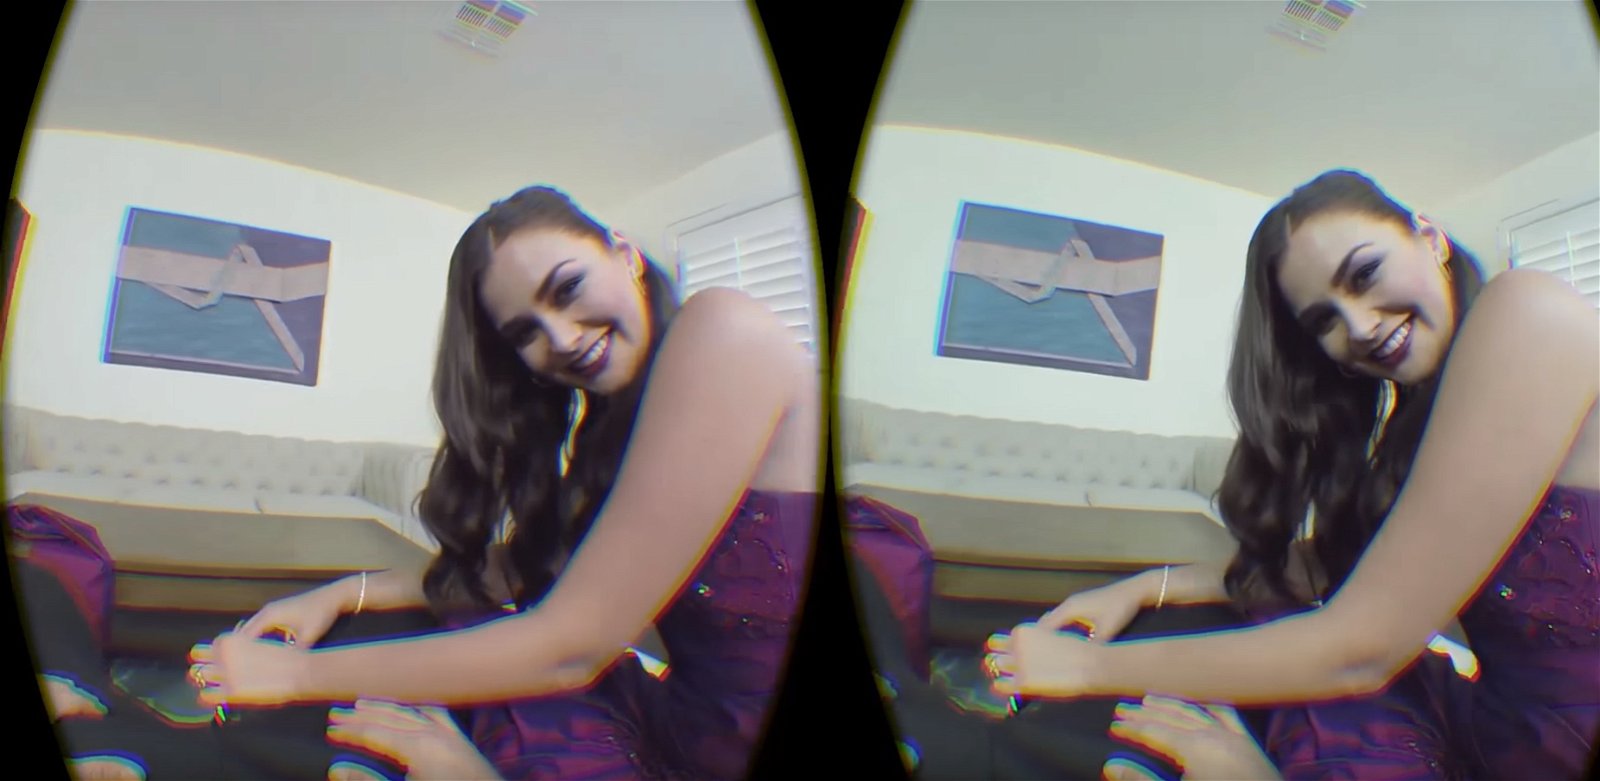 Naughty At E3 2016: The Future Potential Of Vr Porn 7